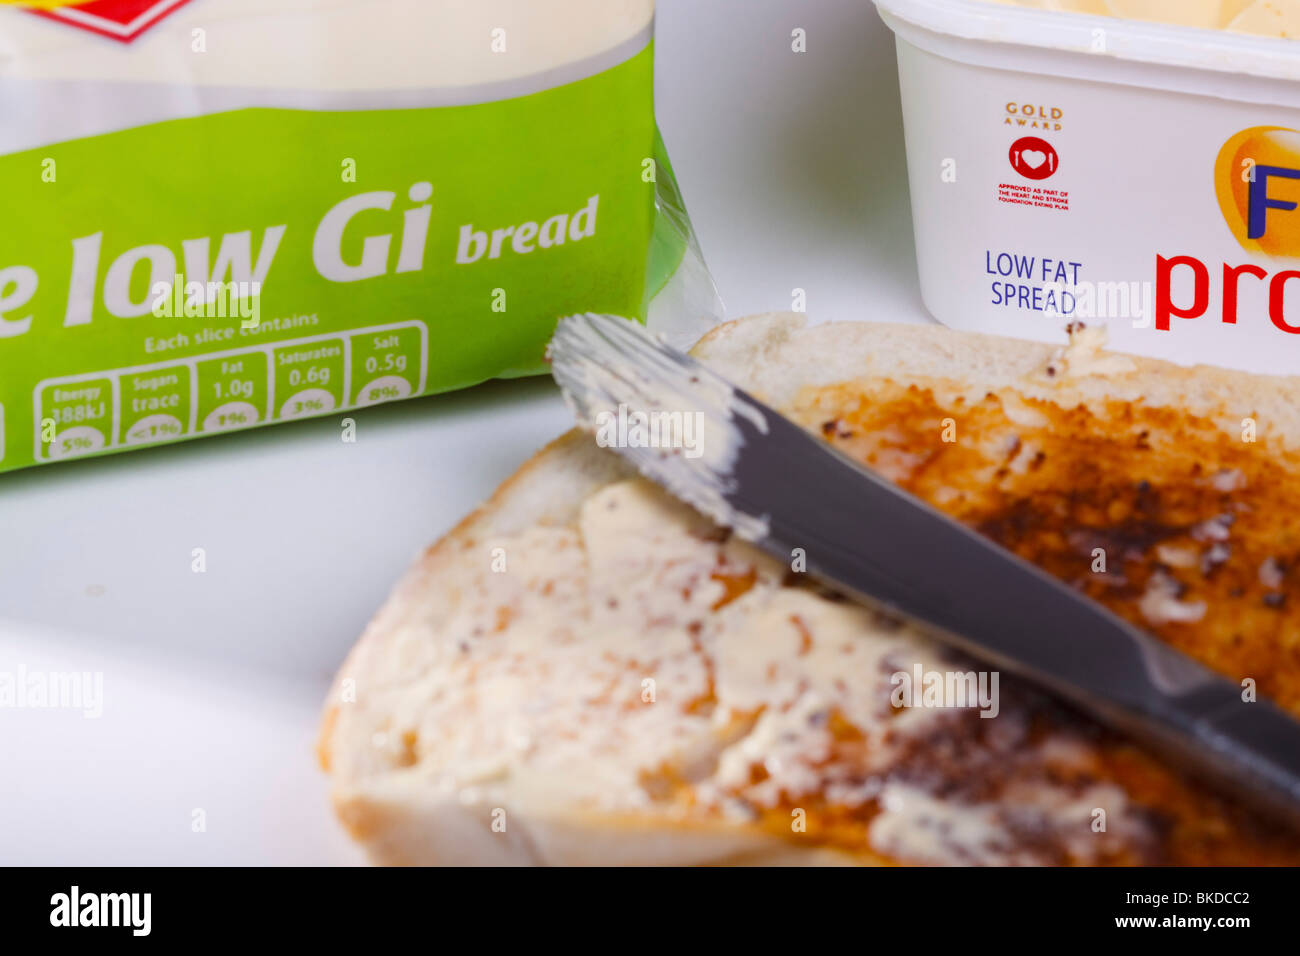 A slice of low Glycemic index toast spread with low fat margarine. Stock Photo